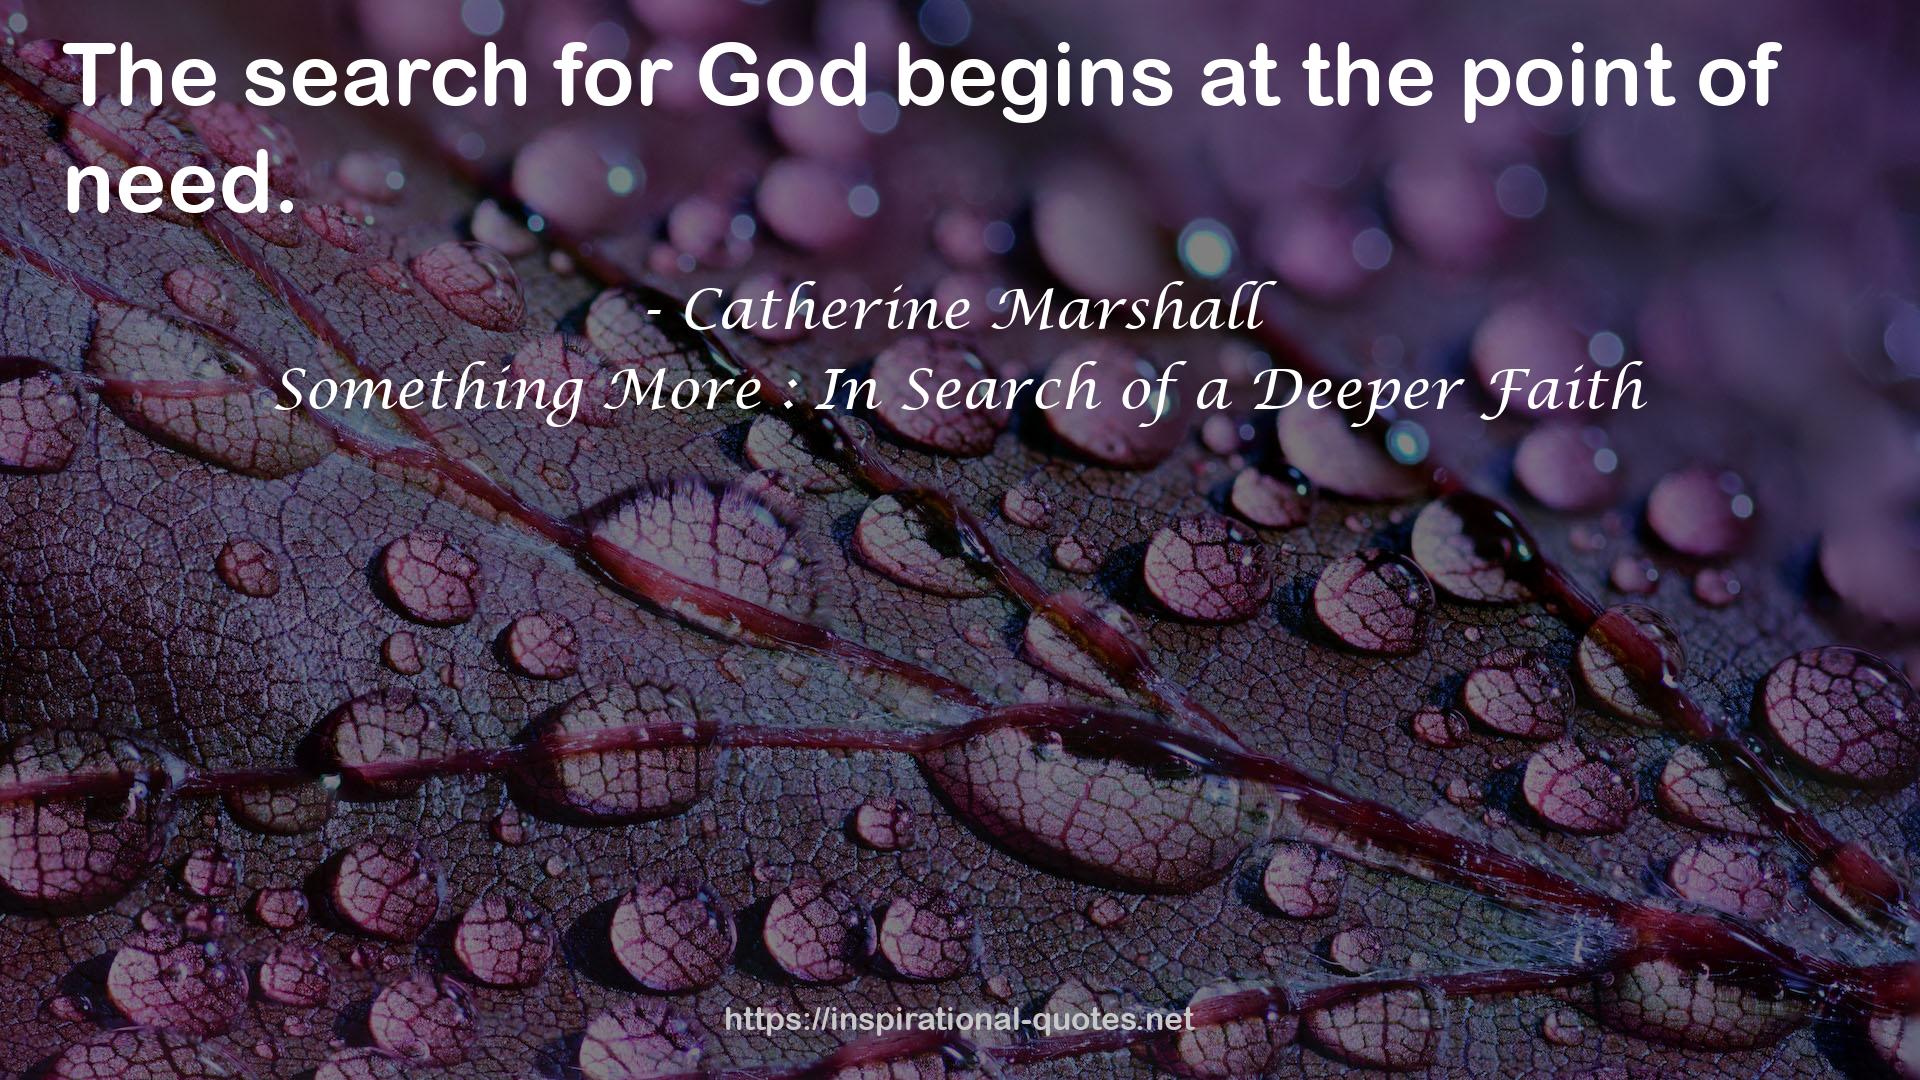 Something More : In Search of a Deeper Faith QUOTES